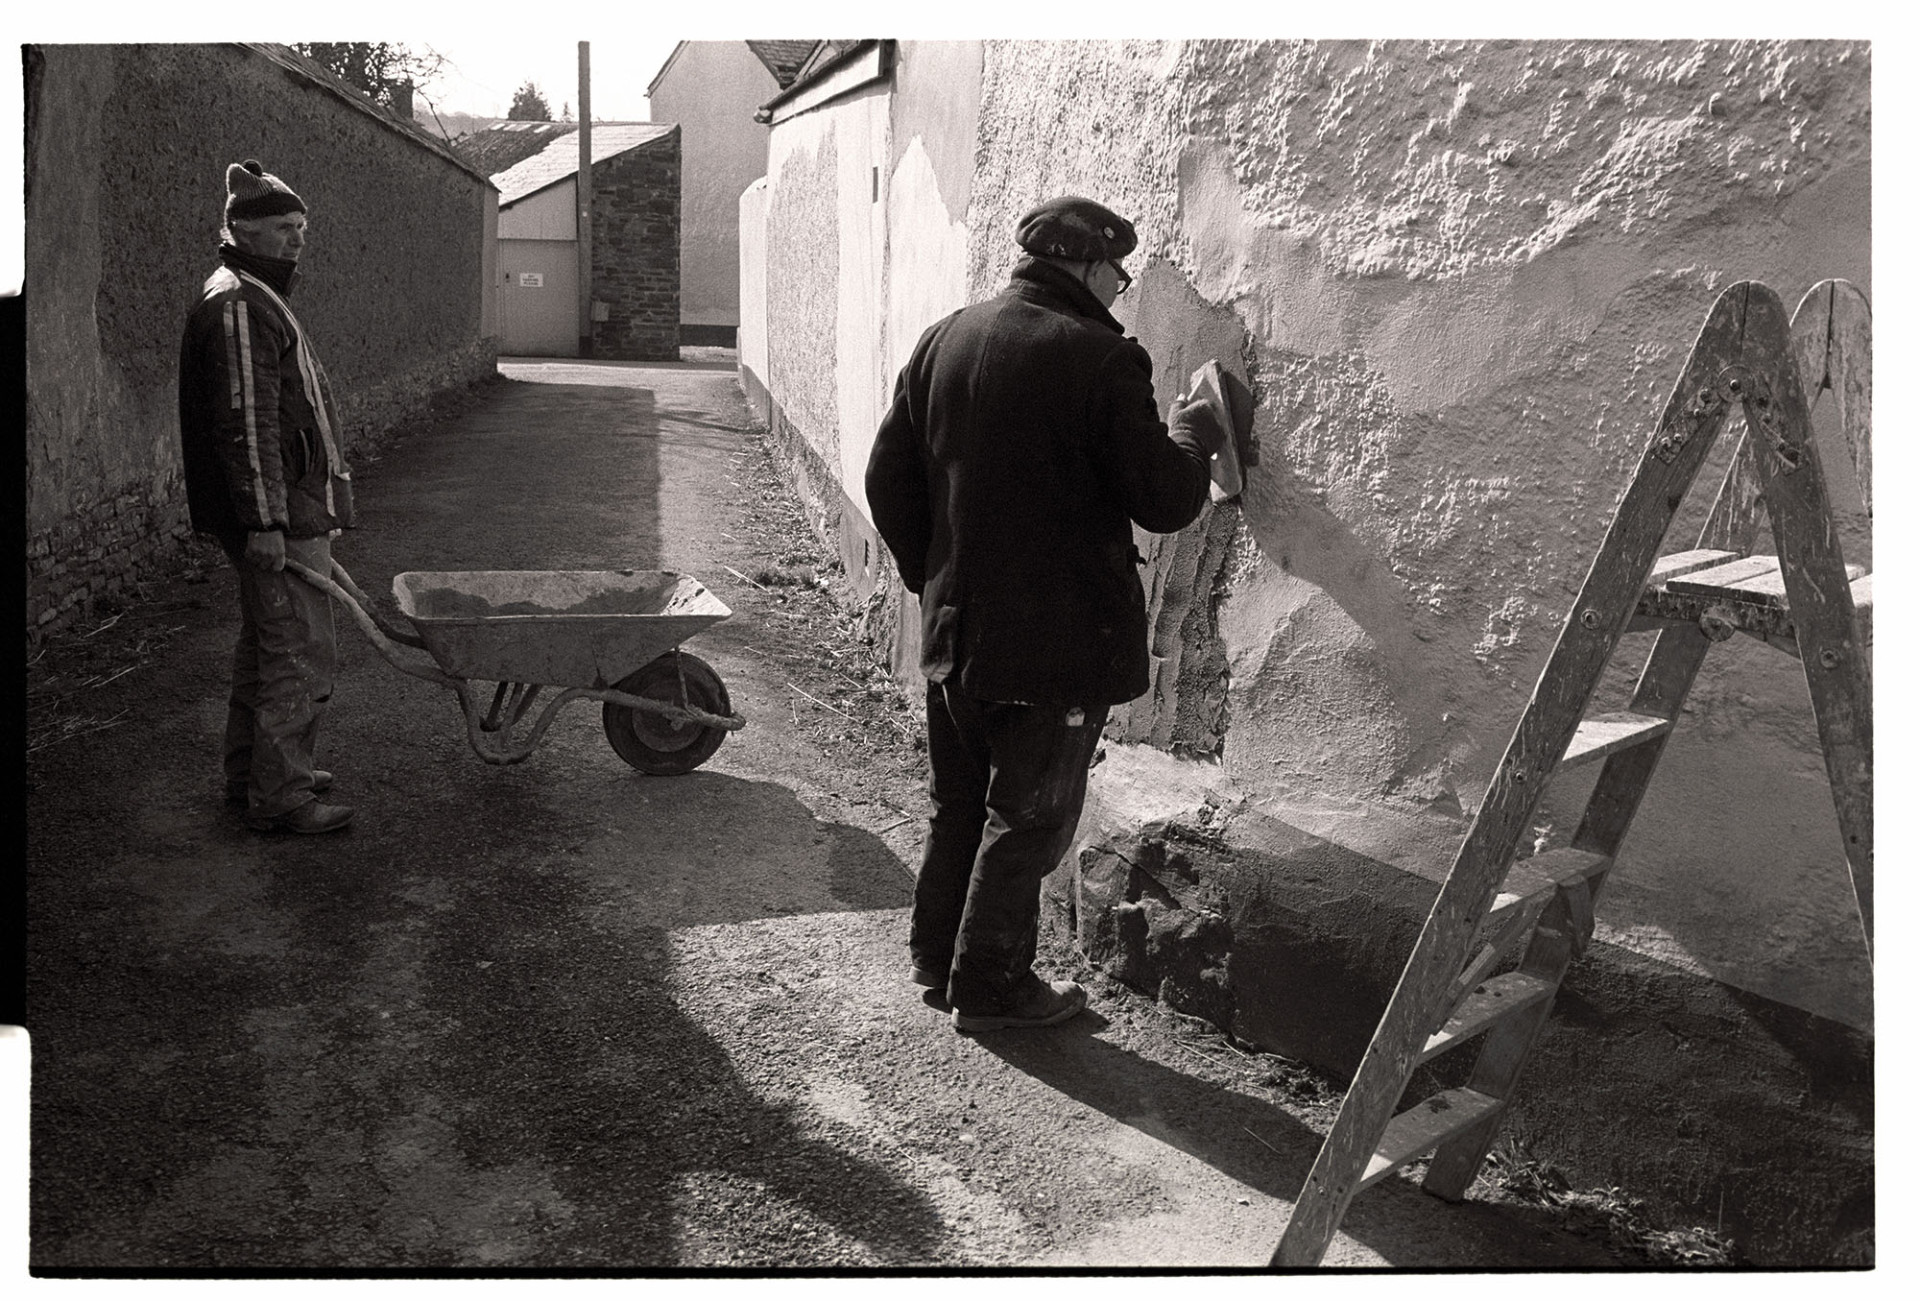 Men repairing cob wall. 
[Derek Marden and Clifford Palmer repairing the cob wall of a building in North Street, Dolton. One of the men is holding a wheelbarrow. A ladder is visible in the foreground.]